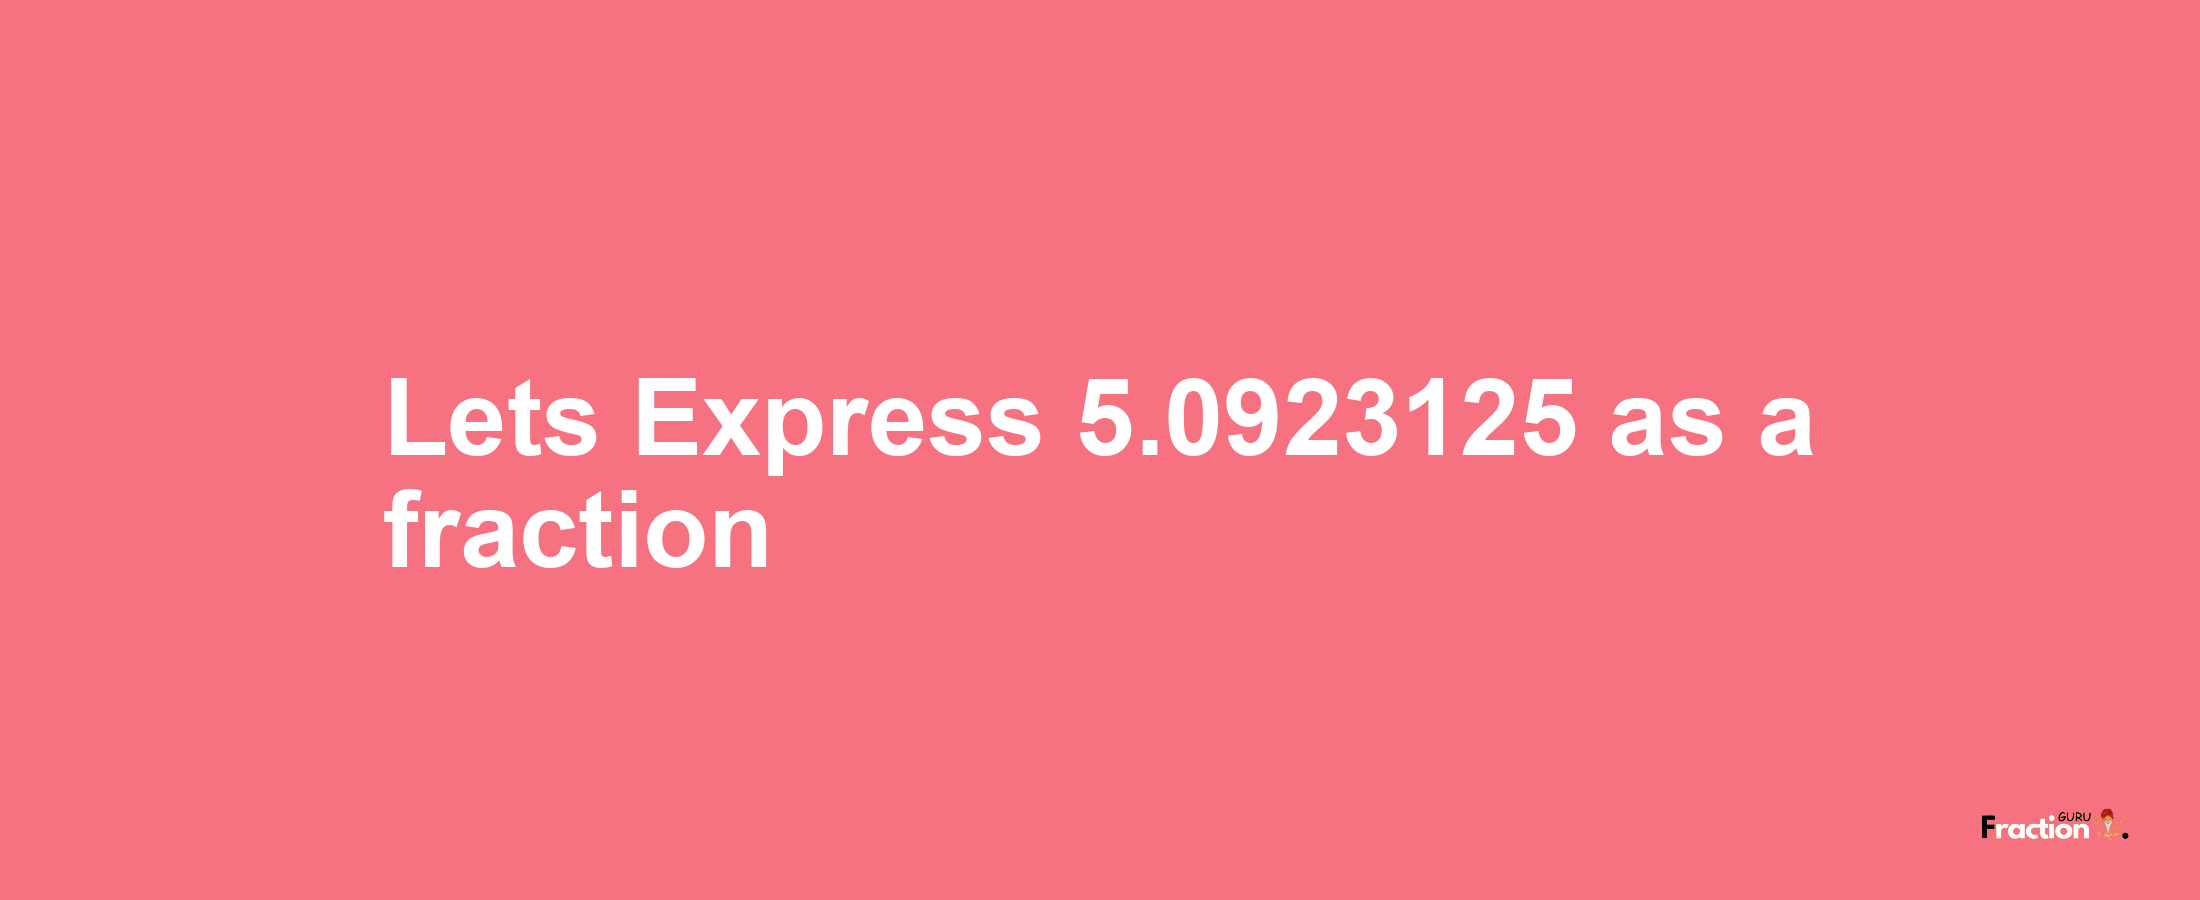 Lets Express 5.0923125 as afraction